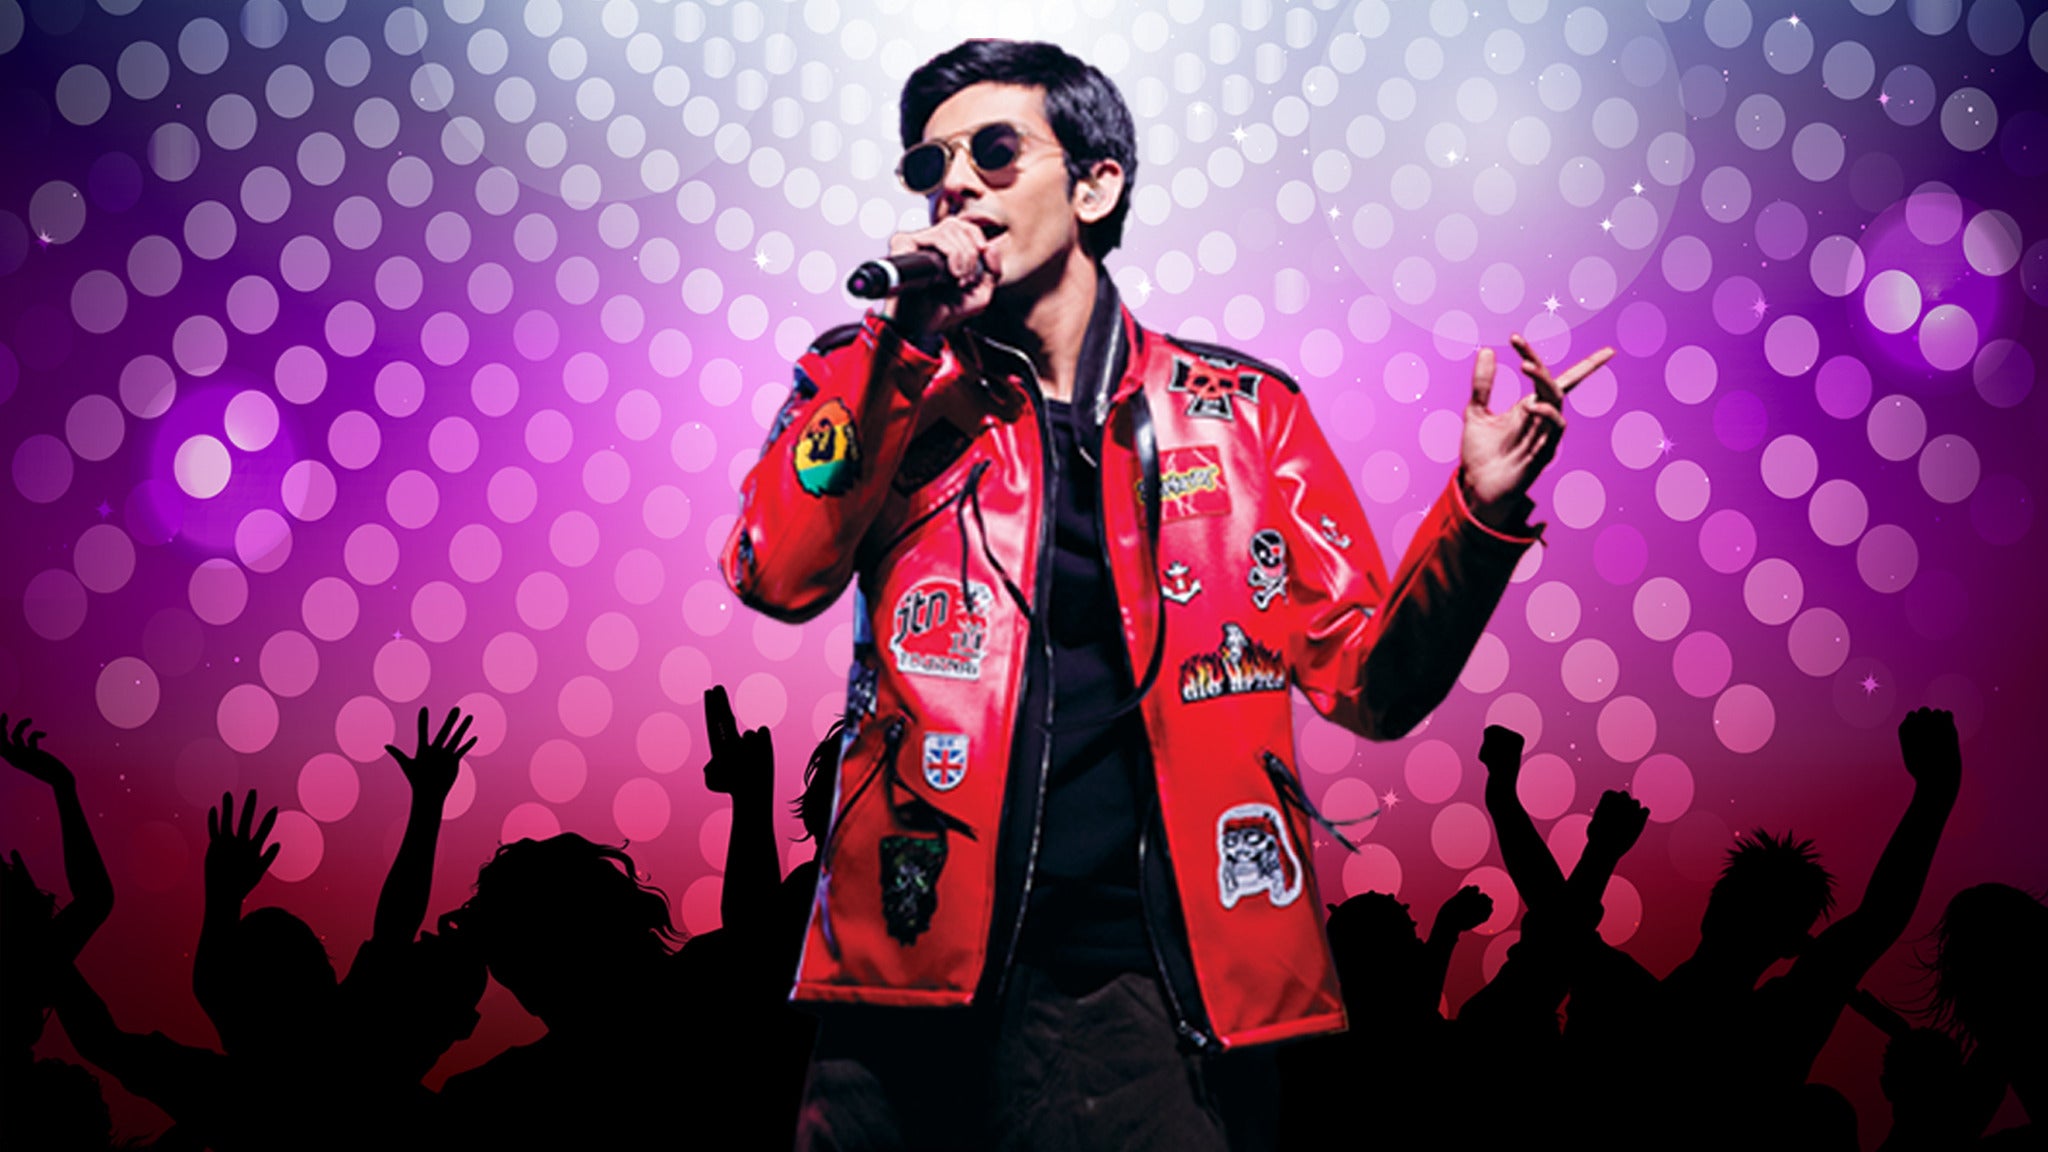 Anirudh - The "Once Upon A Time" Tour